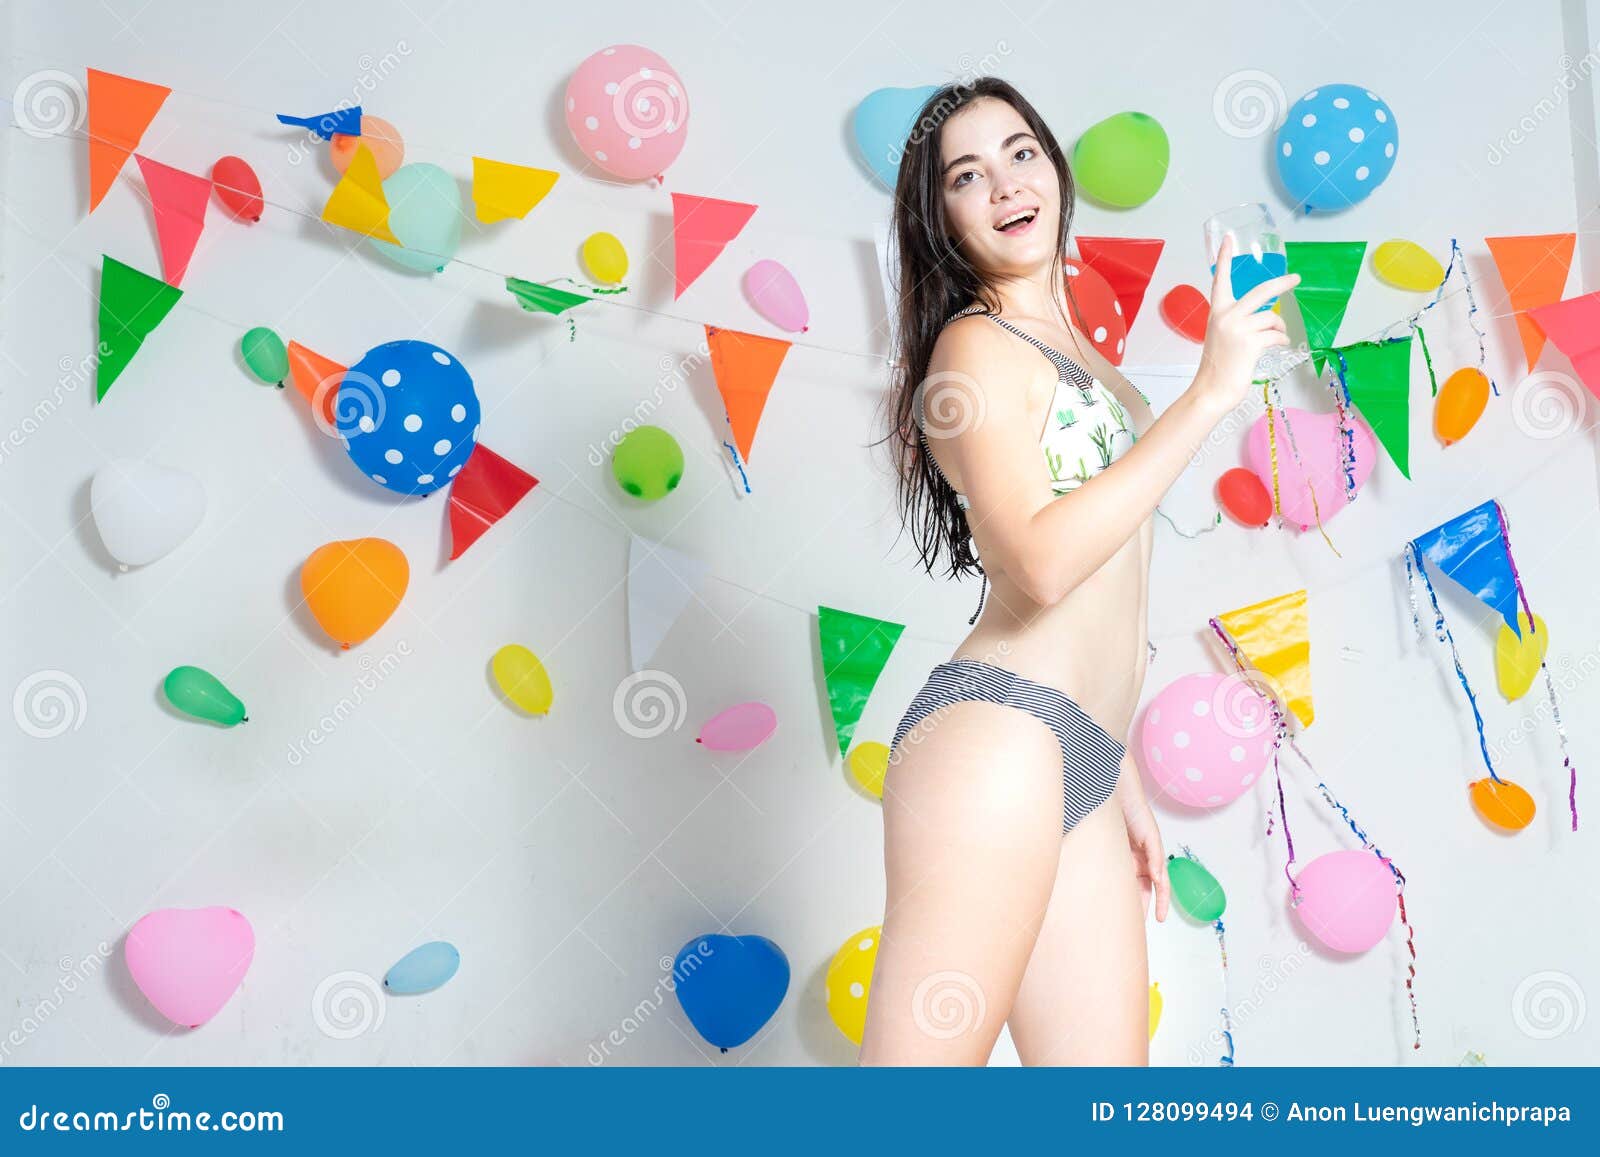 Hot Girl Wearing Bikini Dancing Party Event New Year or B Stock Photo -  Image of confetti, holiday: 128099494